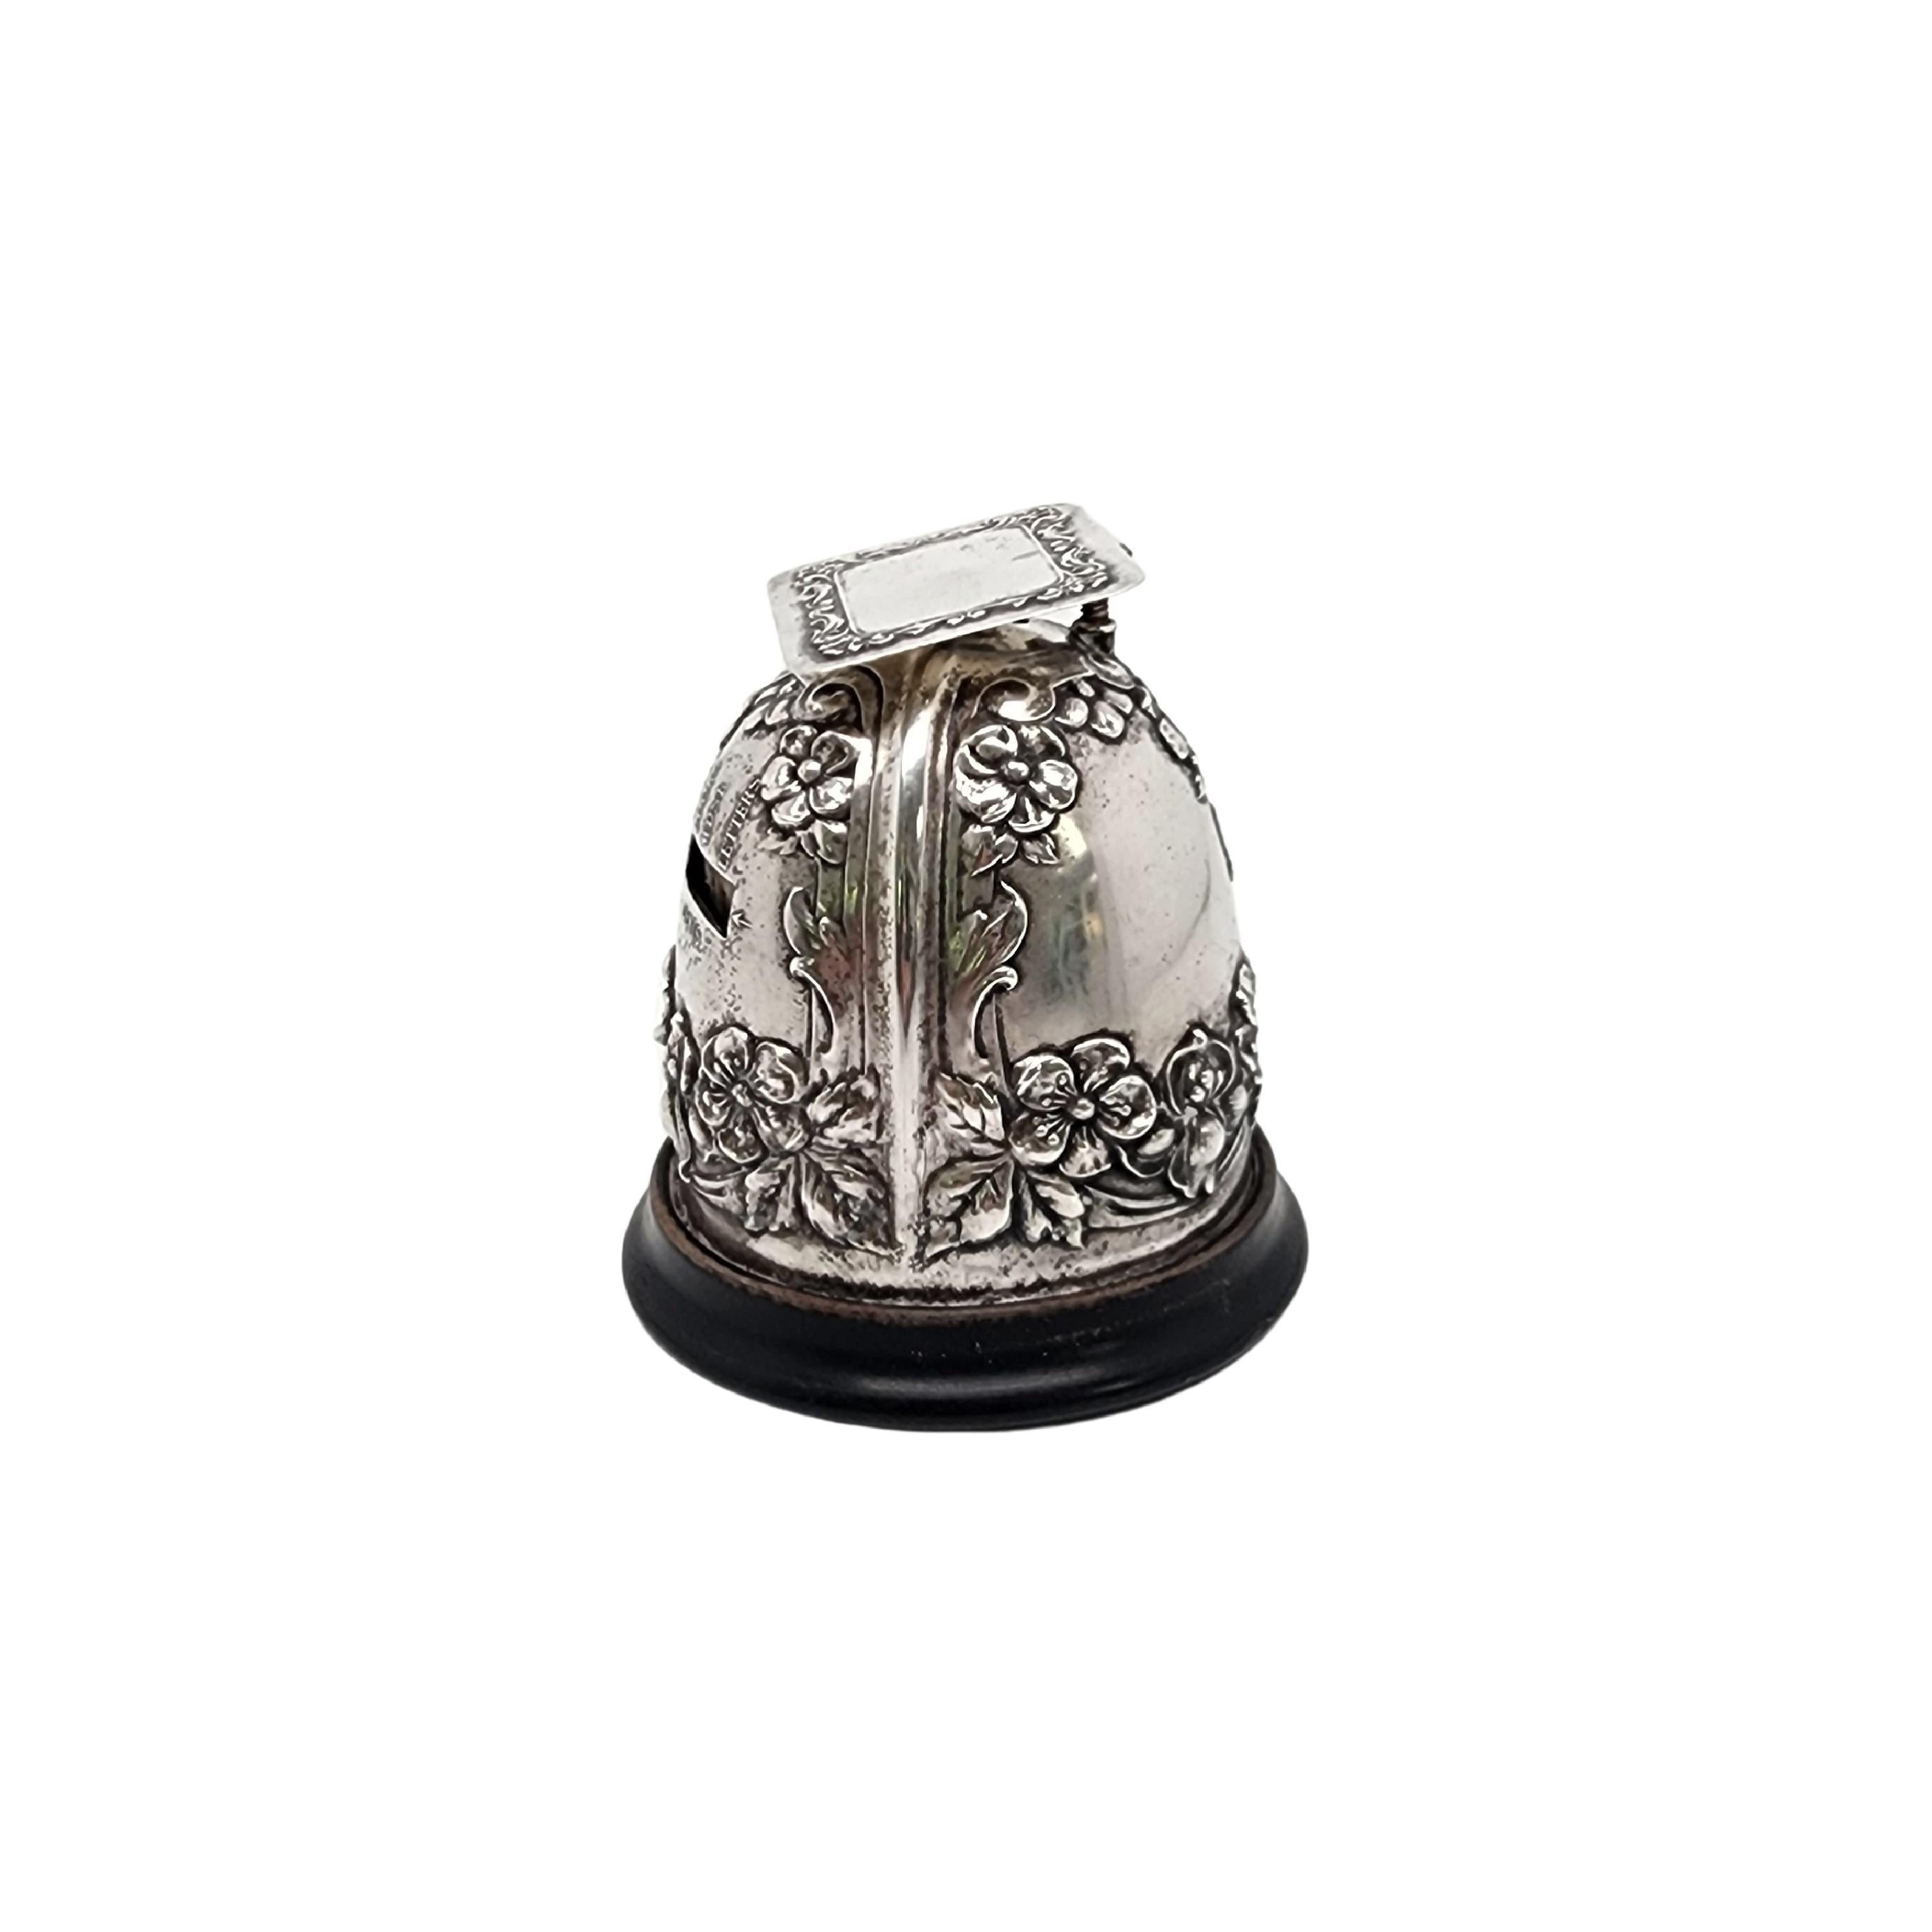 Antique sterling silver postal scale by Gorham, circa 1904.

This antique postal scale features a repousse floral pattern domed scale on a wooden base with a small rectangular platform also adorned in a repousse pattern, screw calibrator. Shipping